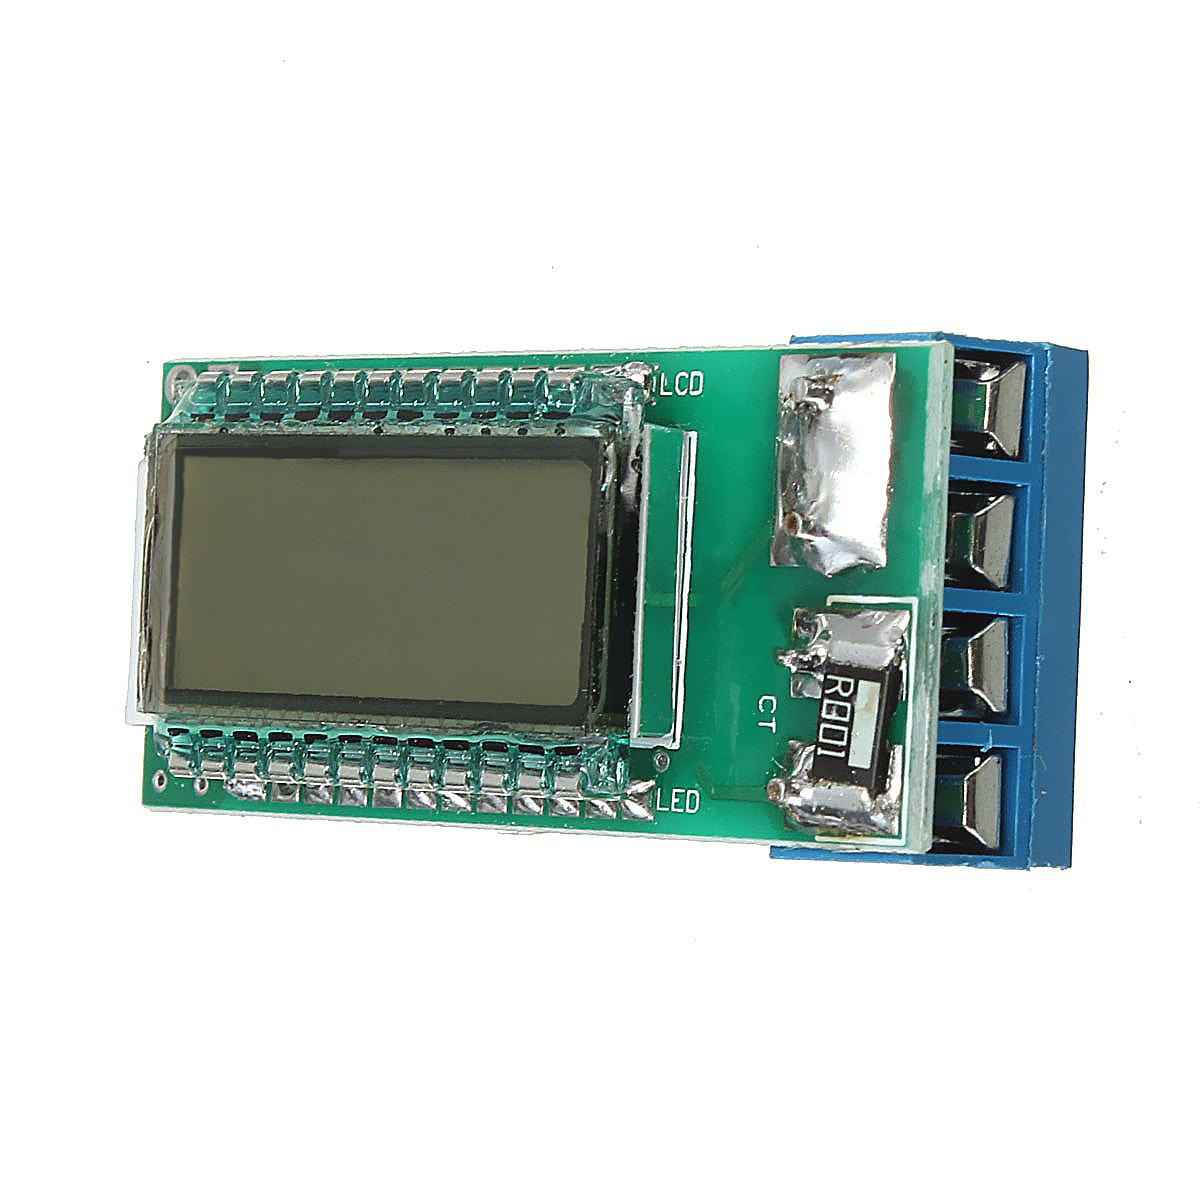 18650-26650-Lithium-Li-ion-Battery-Tester-LCD-Meter-Voltage-Current-Capacity-1044589